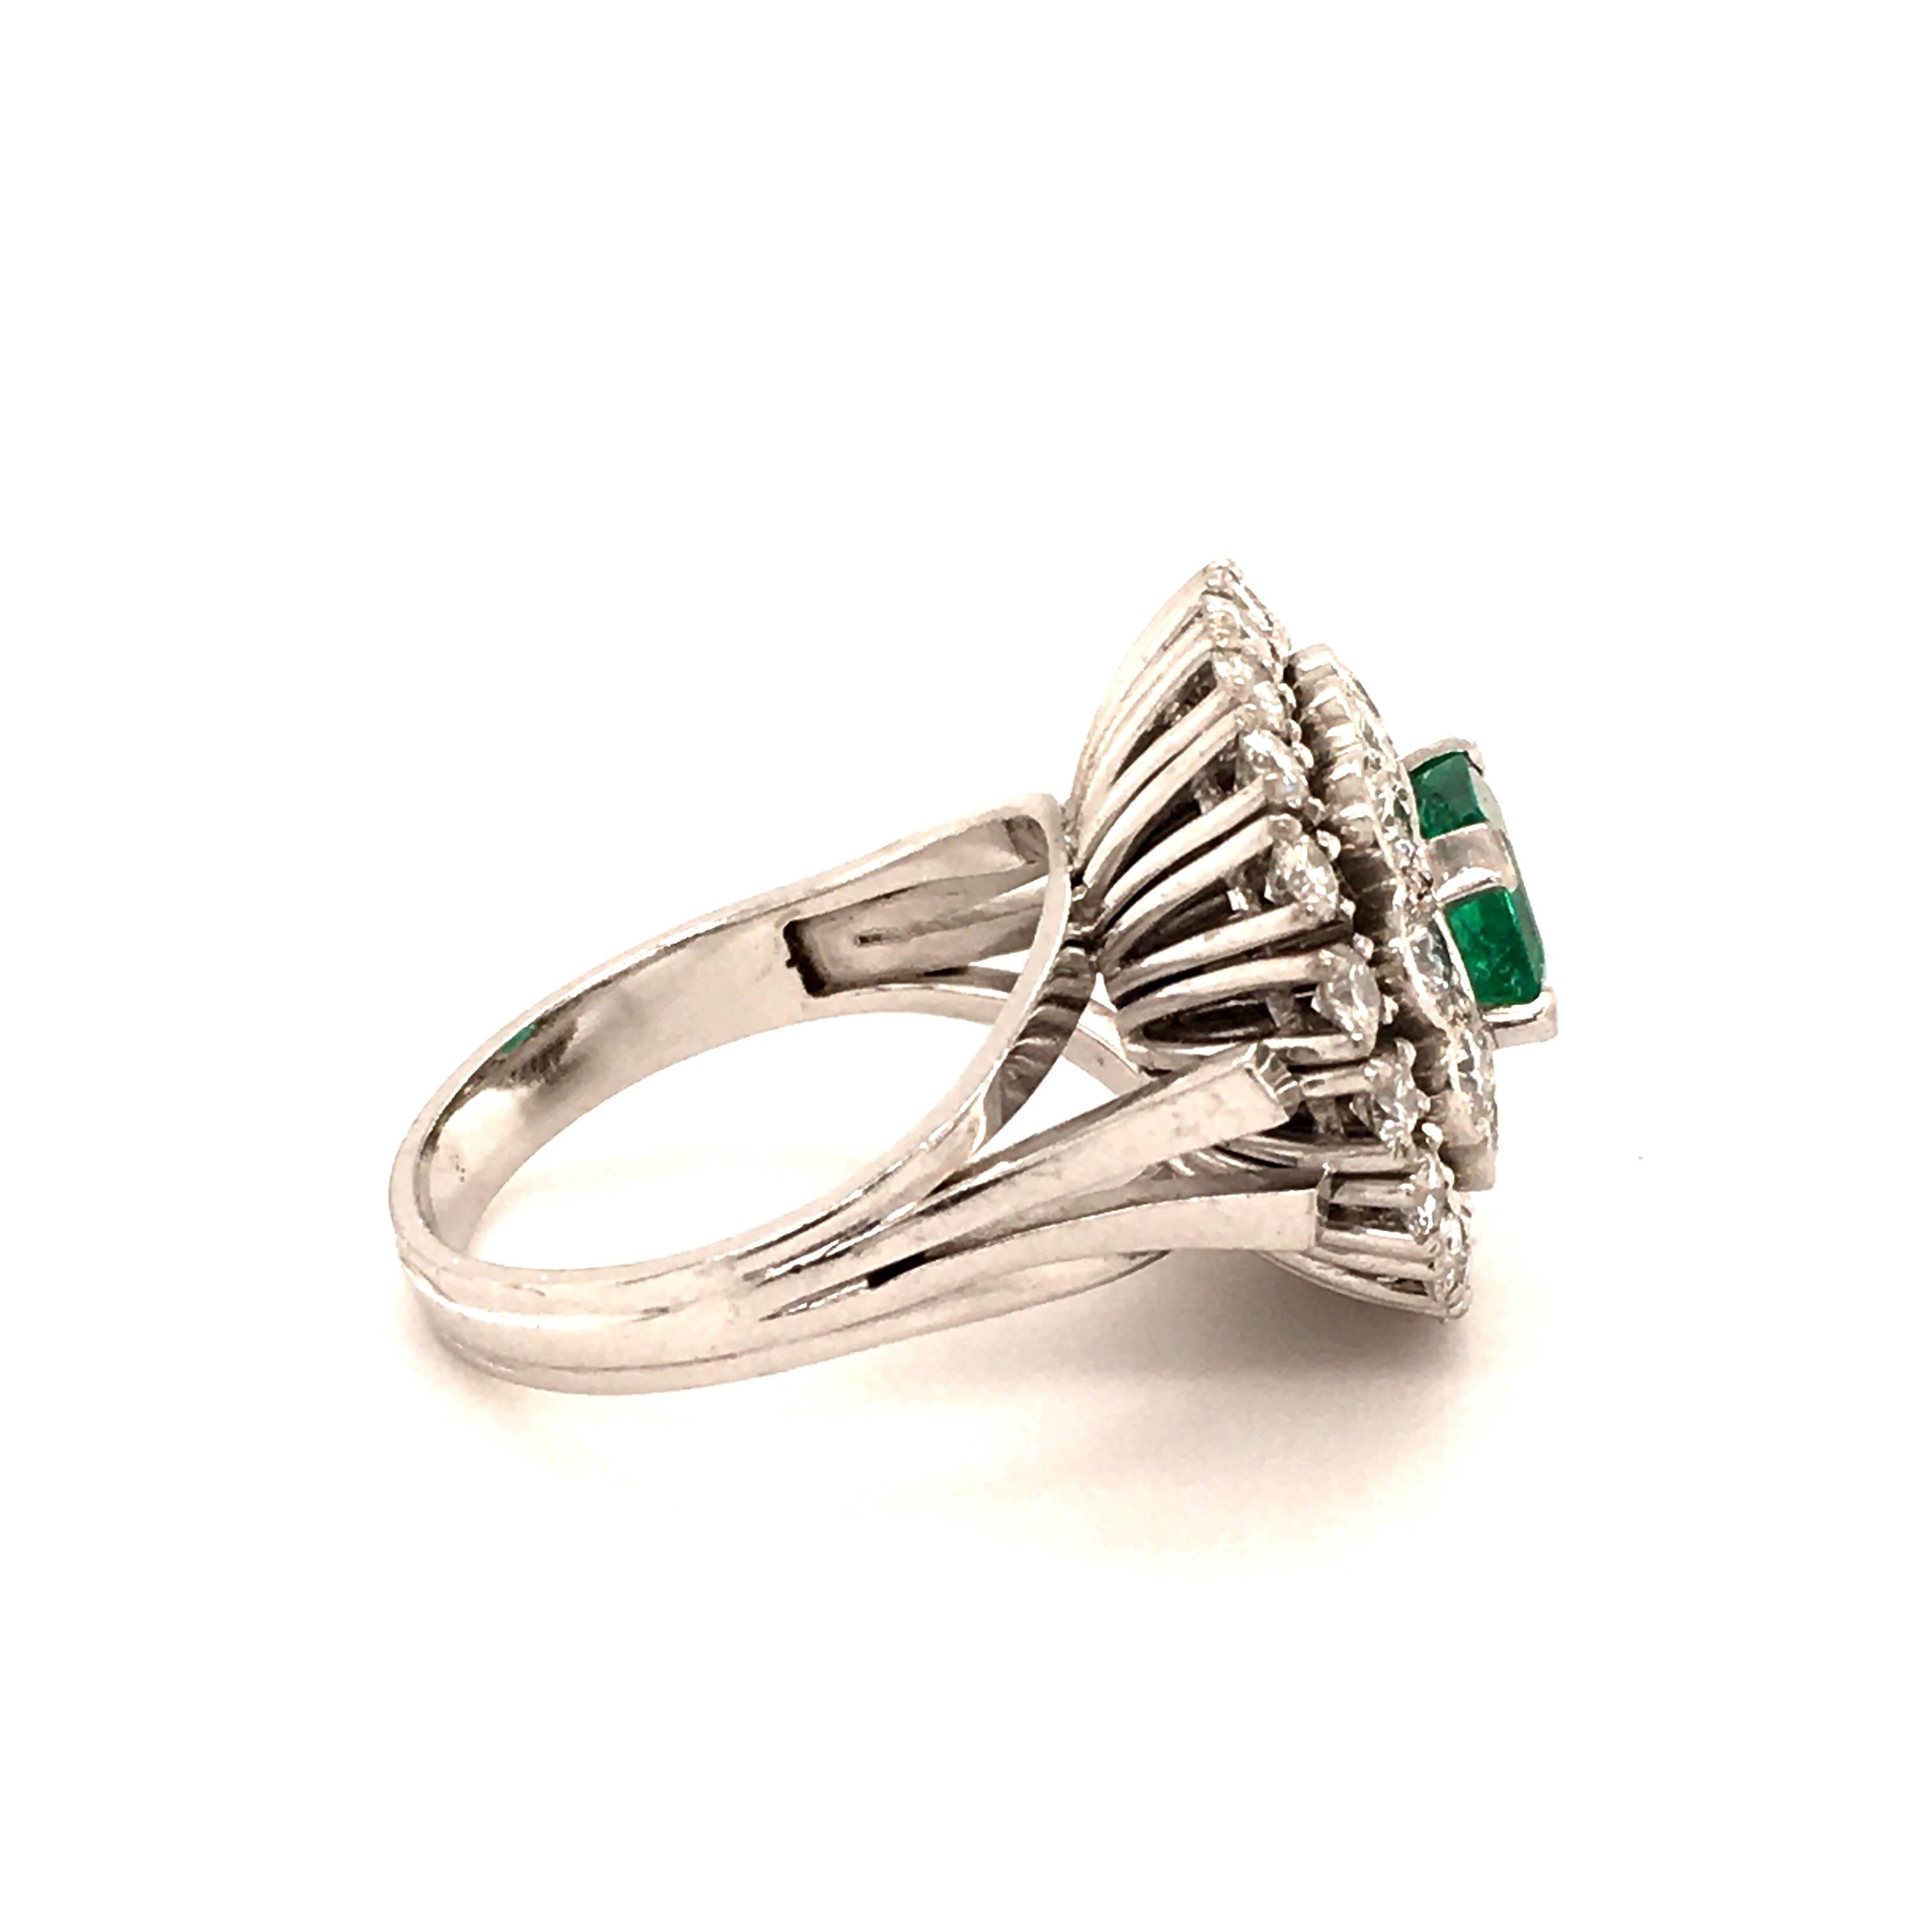 Fabilous Emerald and Diamond Ring in 18 Karat White Gold For Sale 4